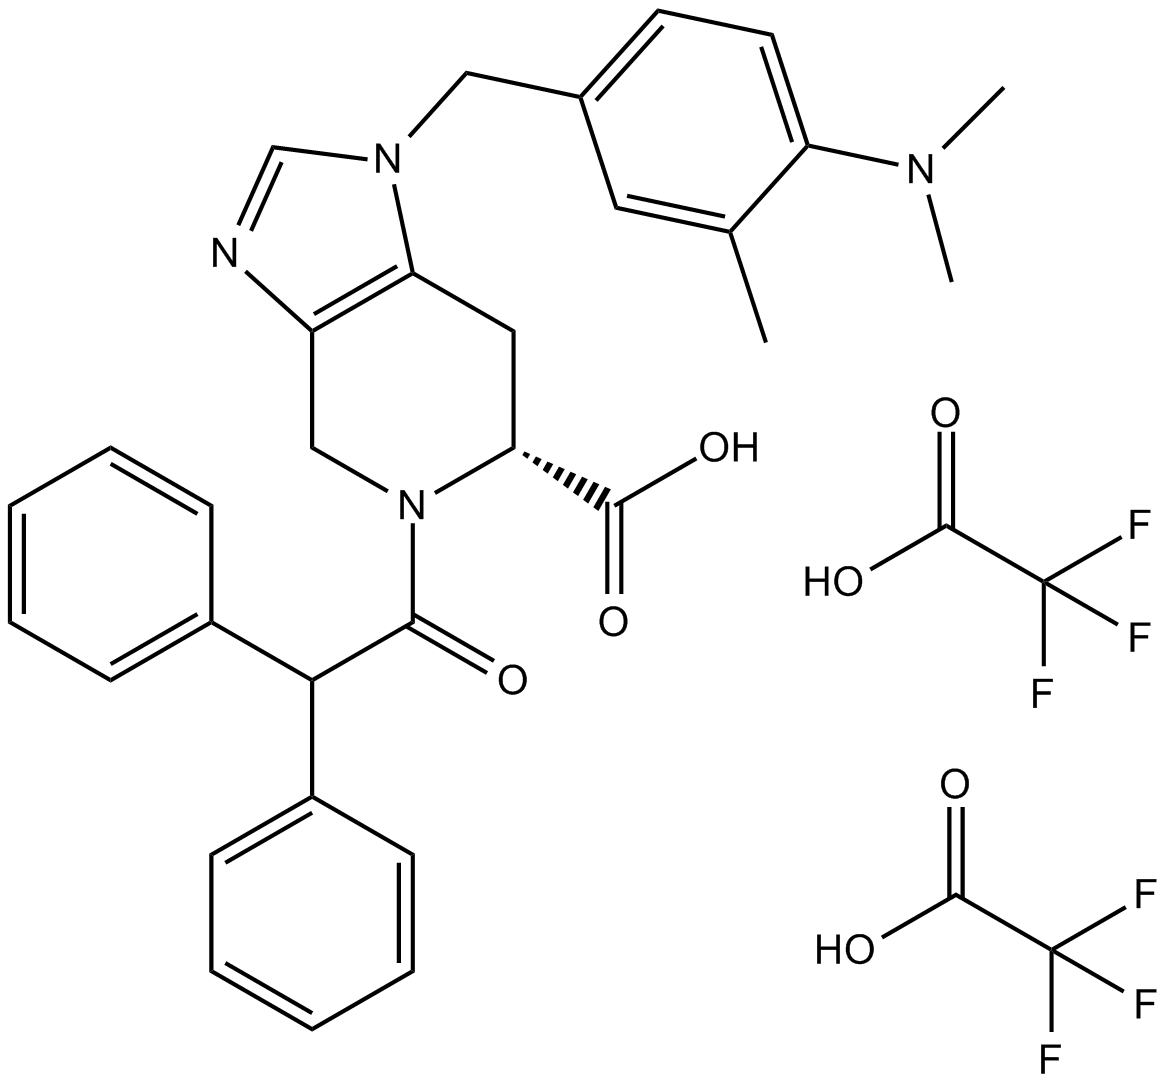 PD 123319 ditrifluoroacetate  Chemical Structure